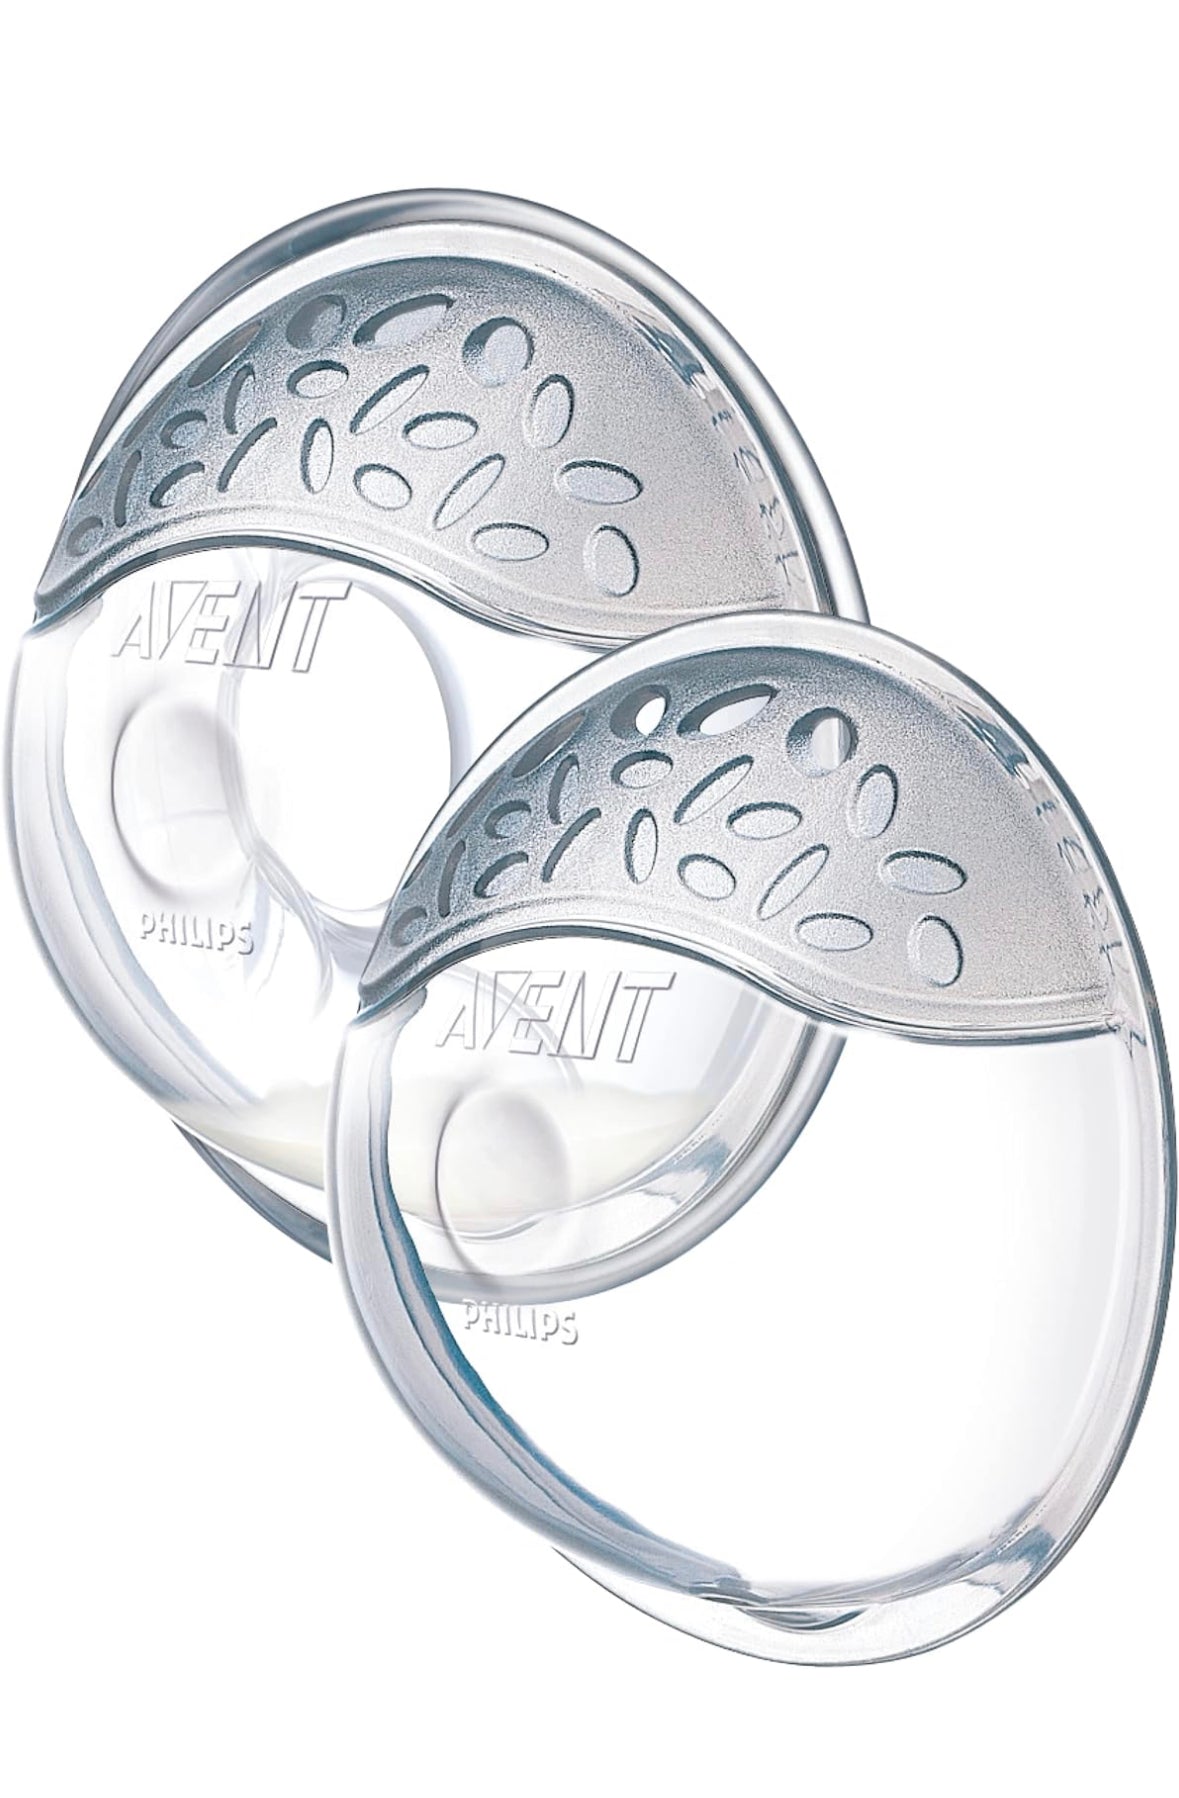 Philips AVENT Comfort Breast Shell Set, 2 Pack